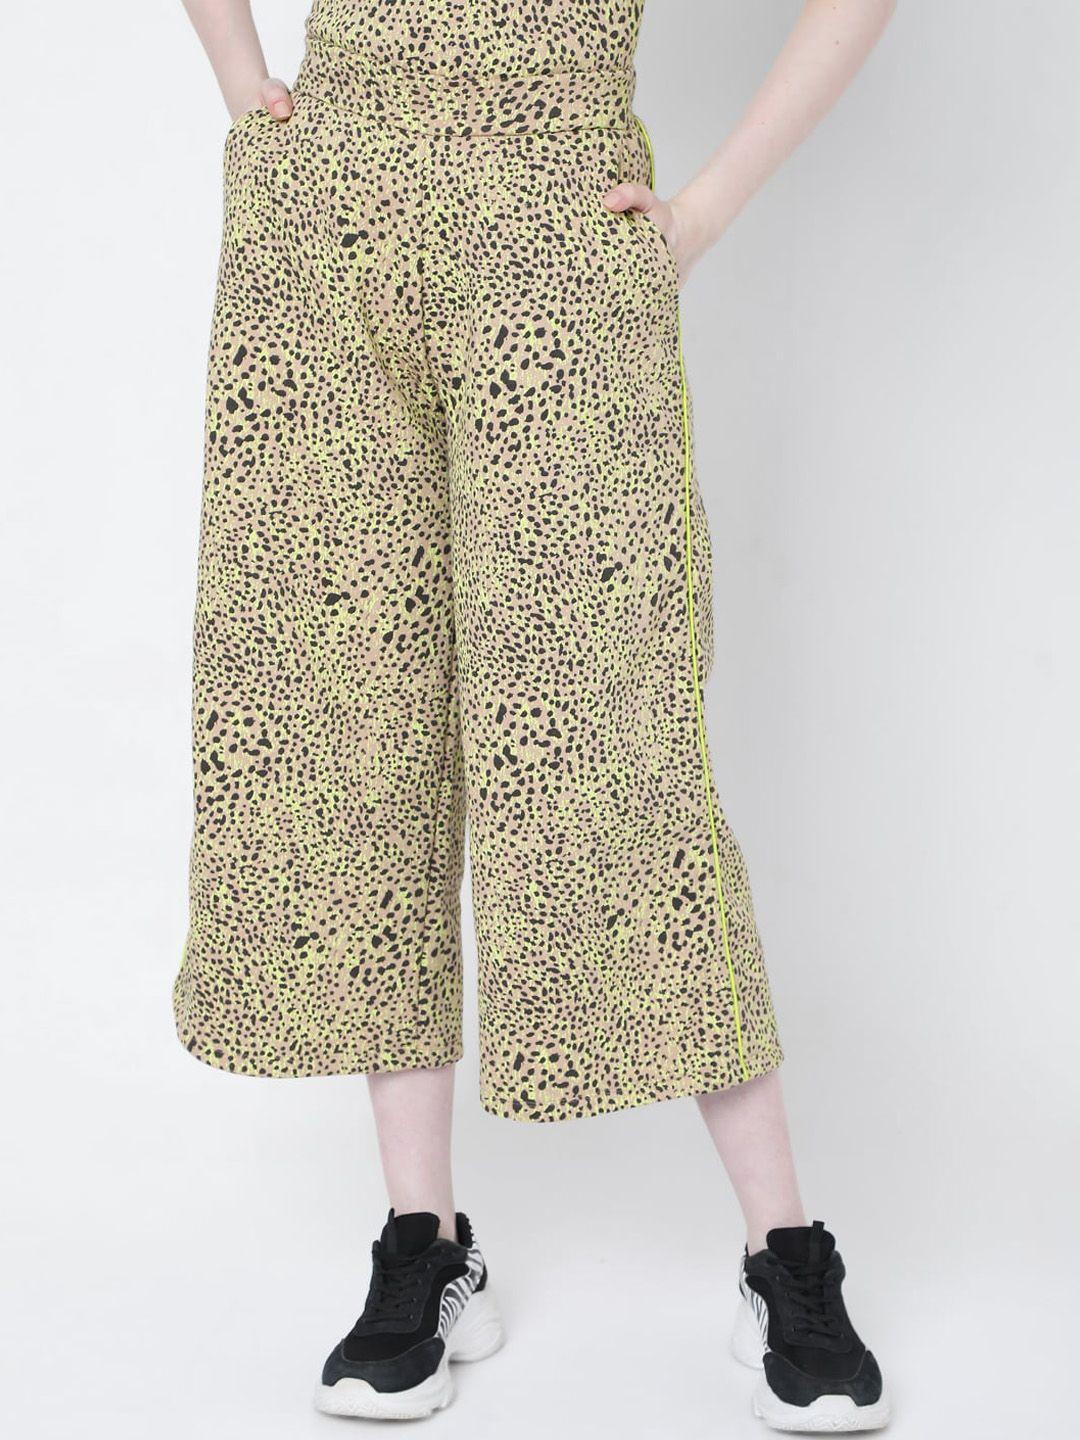 vero moda women brown floral printed loose fit high-rise culottes trousers